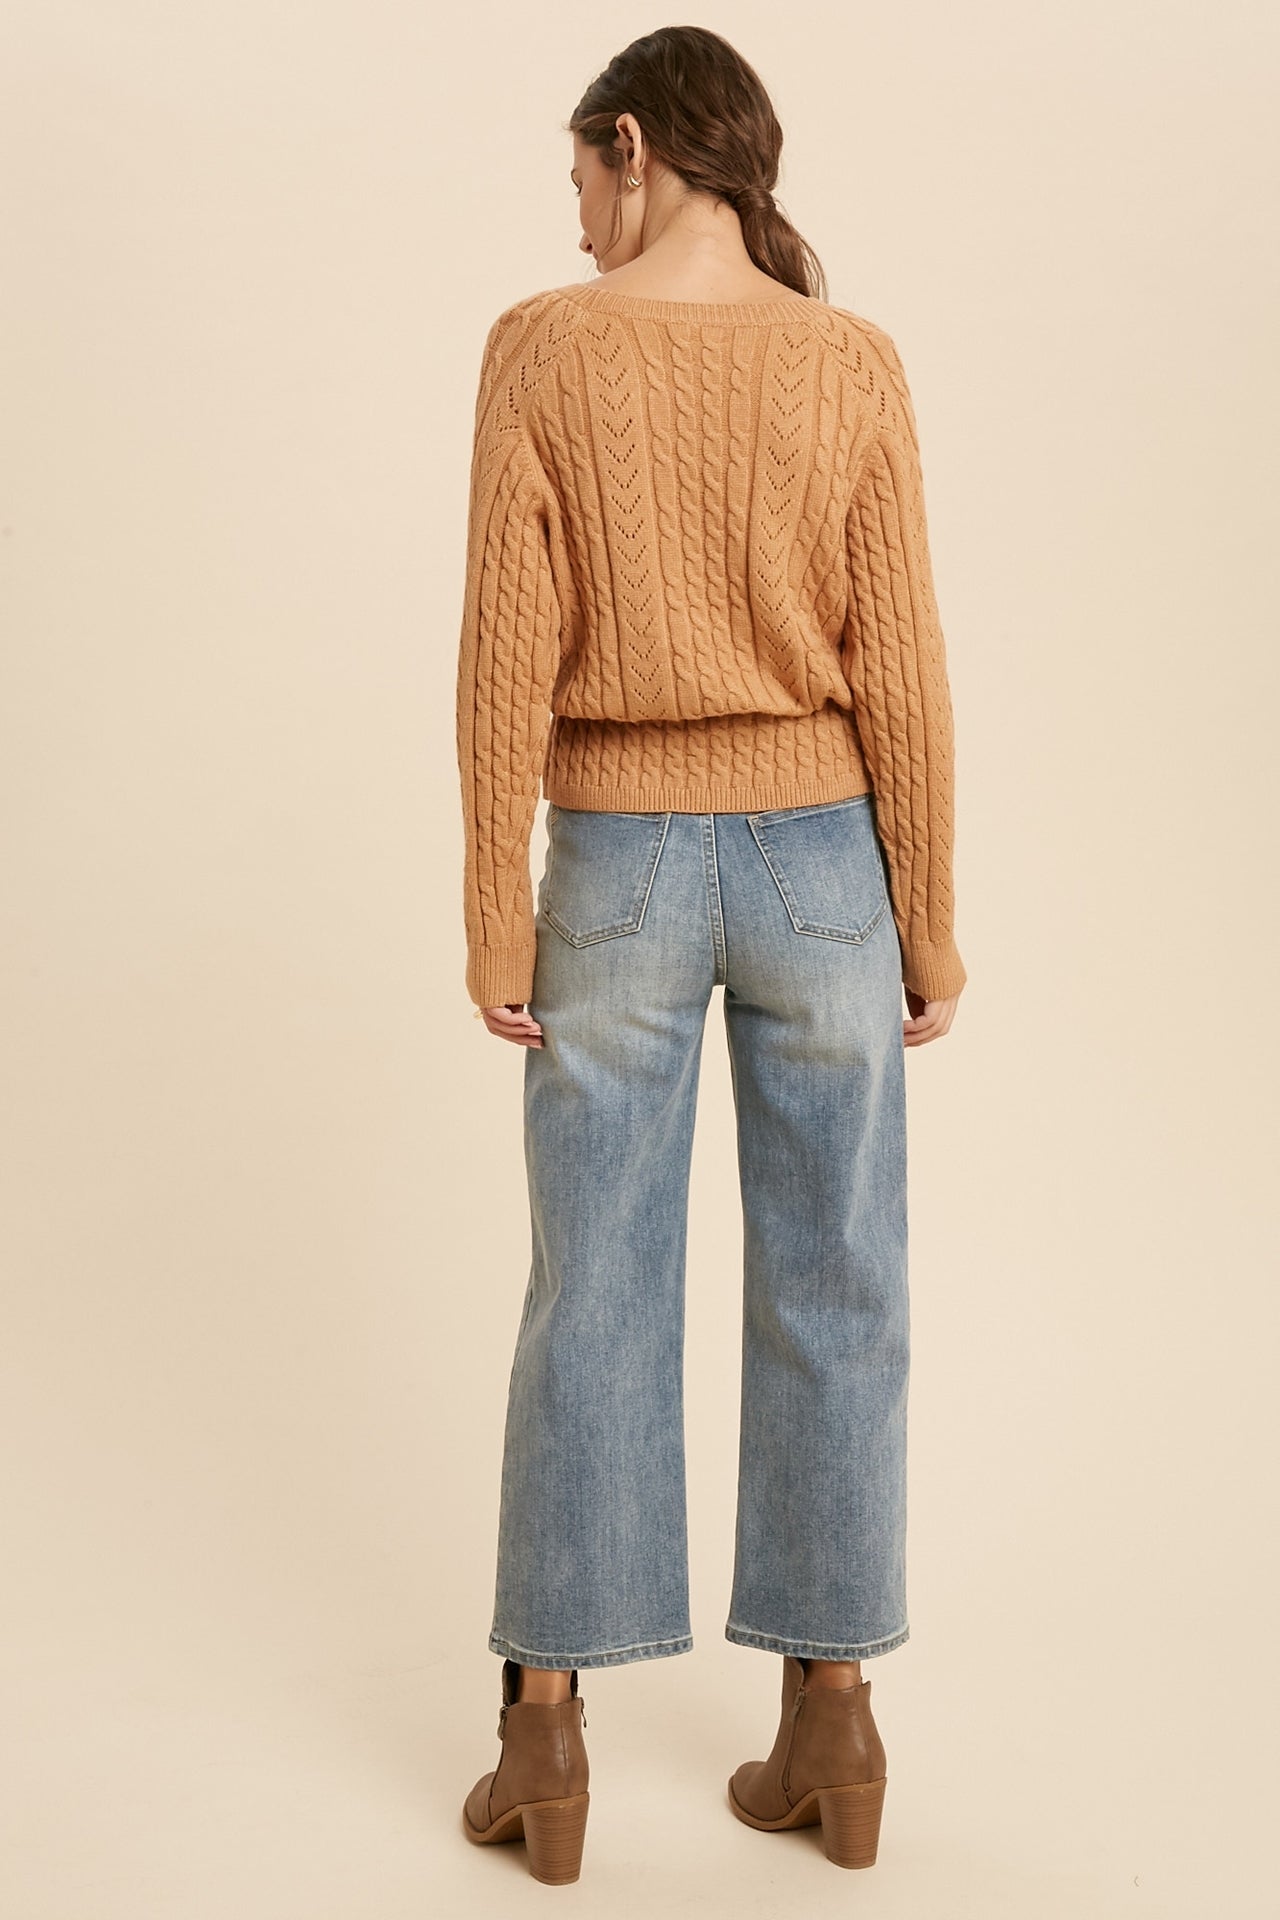 Cable Knit Drawstring Long Sleeve Sweater in Camel color. Back view.